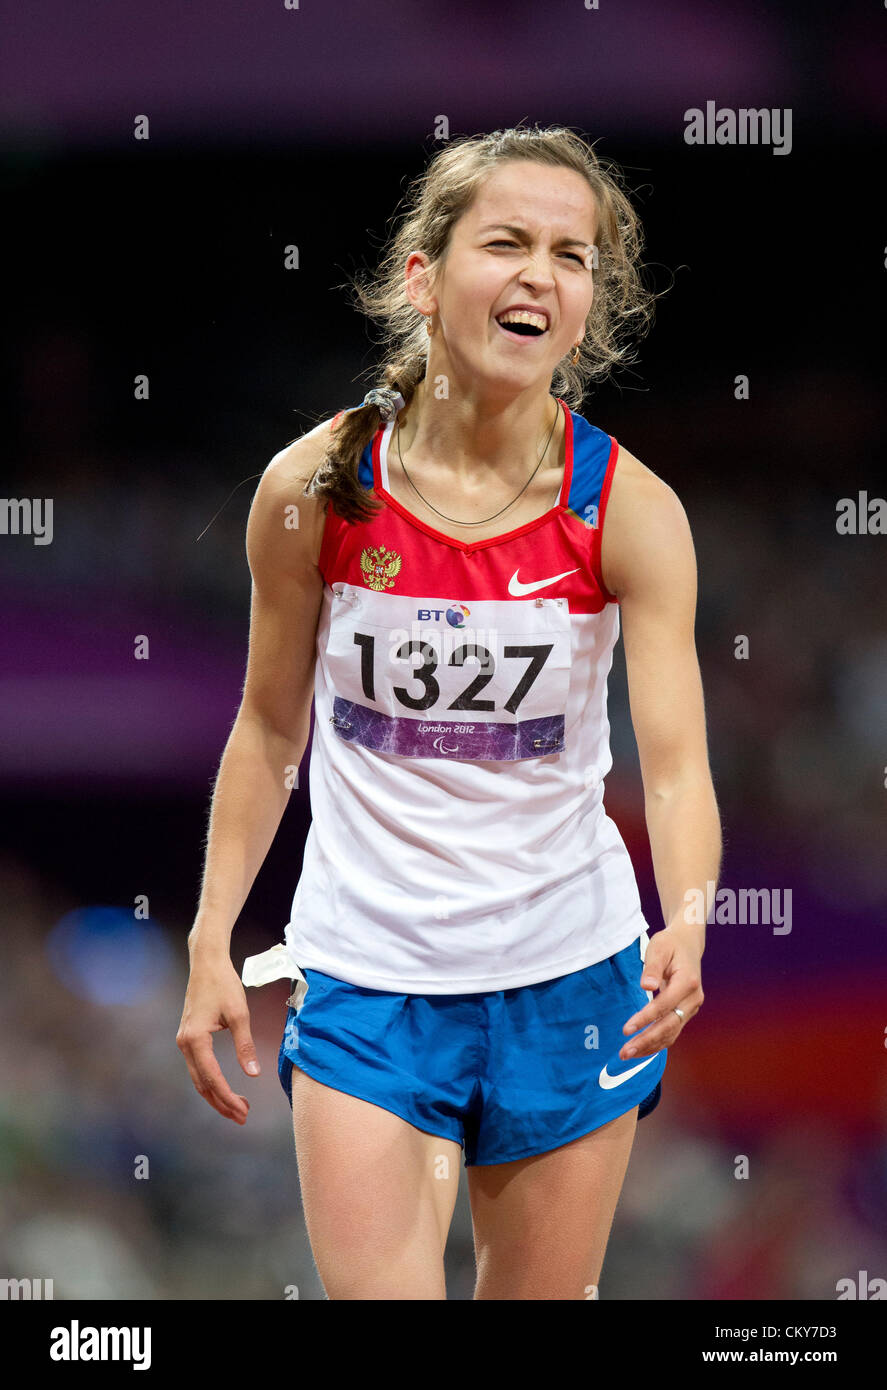 Elena Ivanova of Russia smiles at the finish line after winning the women's  200 meters T36 sprint at the London Paralympics Stock Photo - Alamy